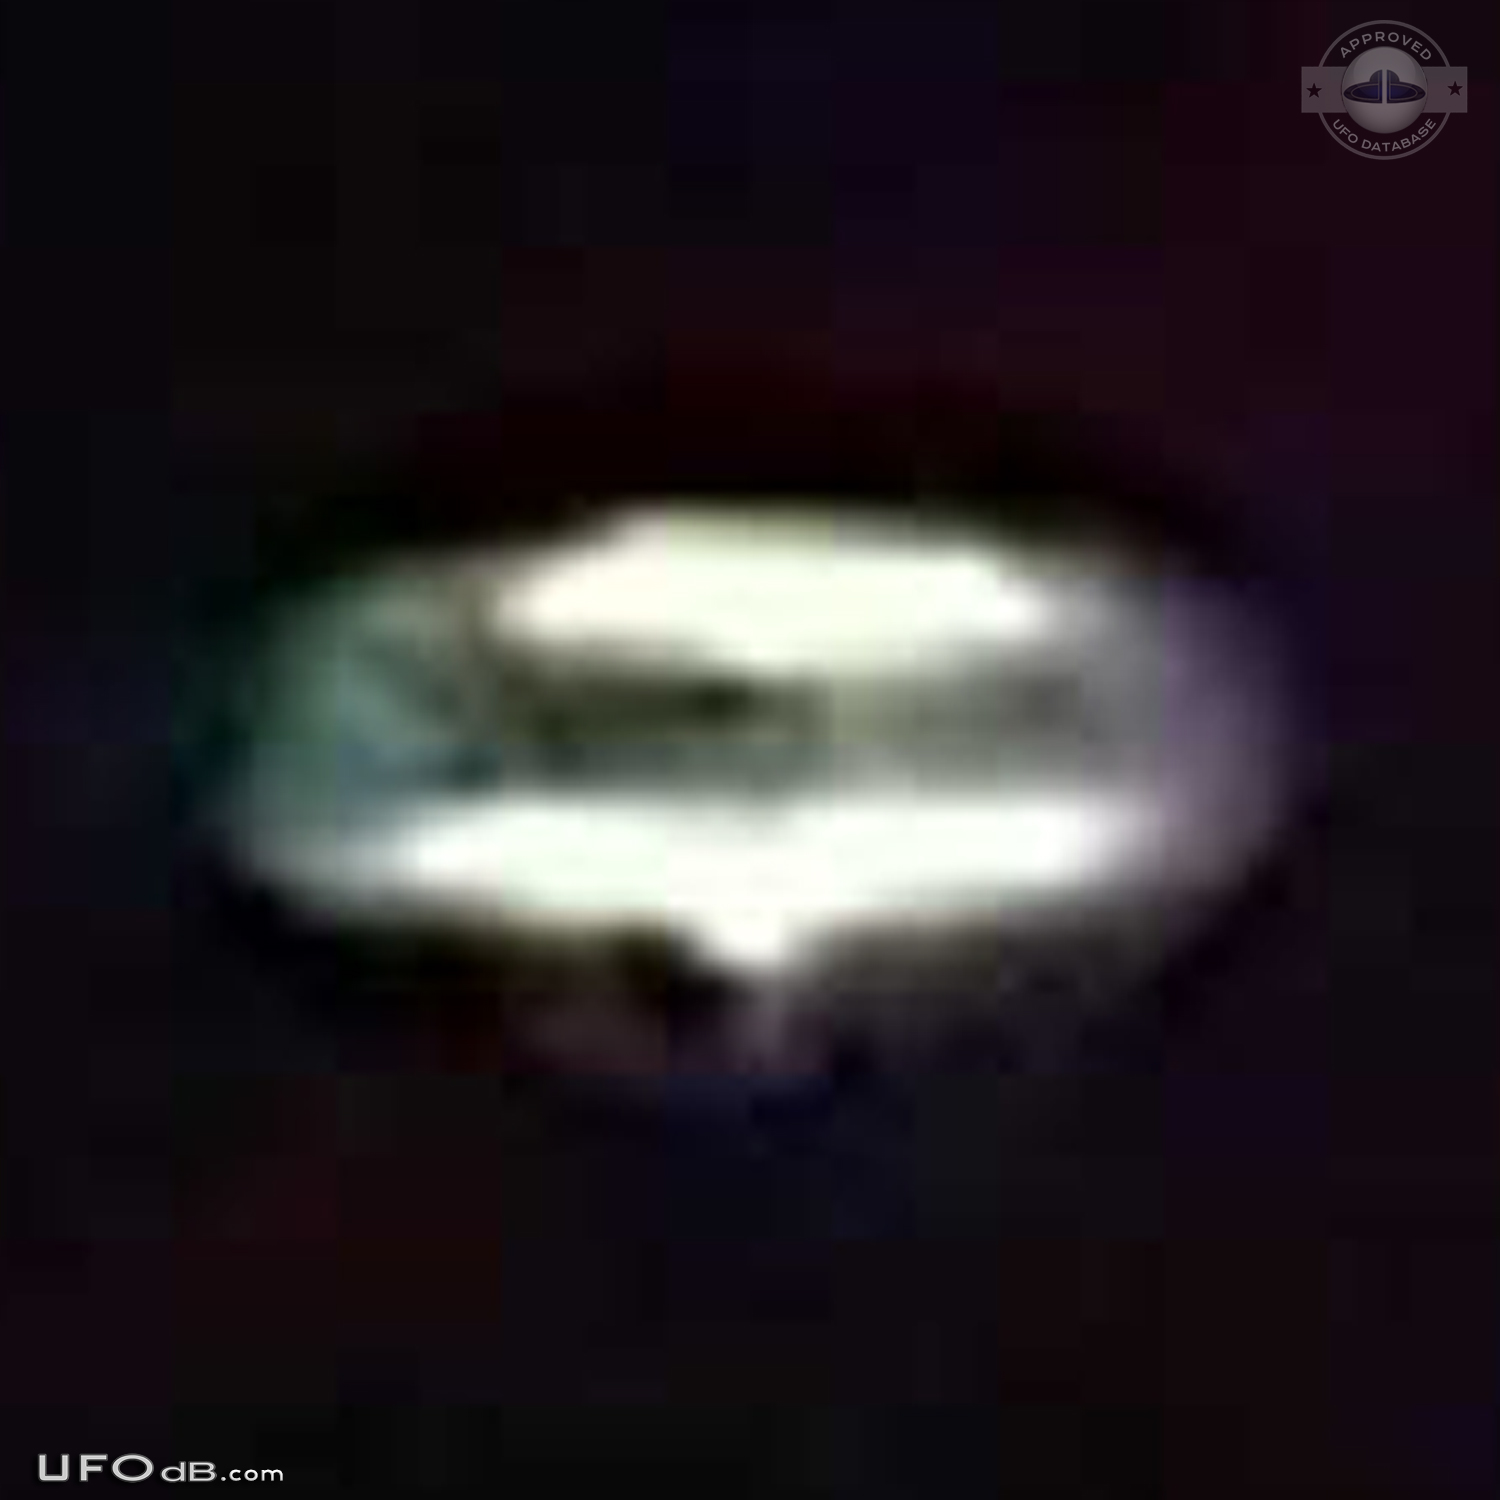 Man take picture of UFO he taught it was a blimp - Los Angeles 2011 UFO Picture #389-4